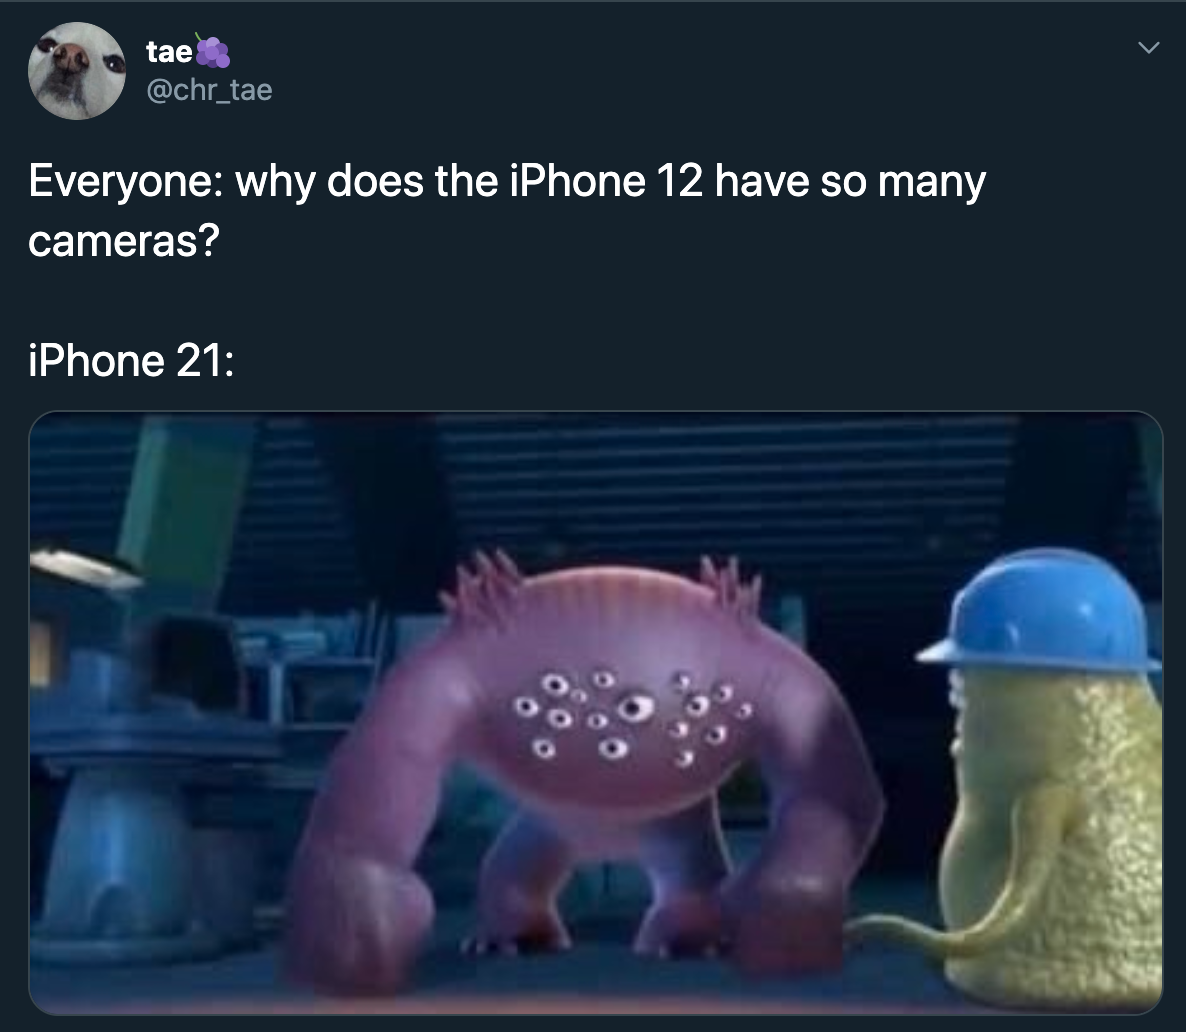 Everyone why does the iPhone 12 have so many cameras? iPhone 21